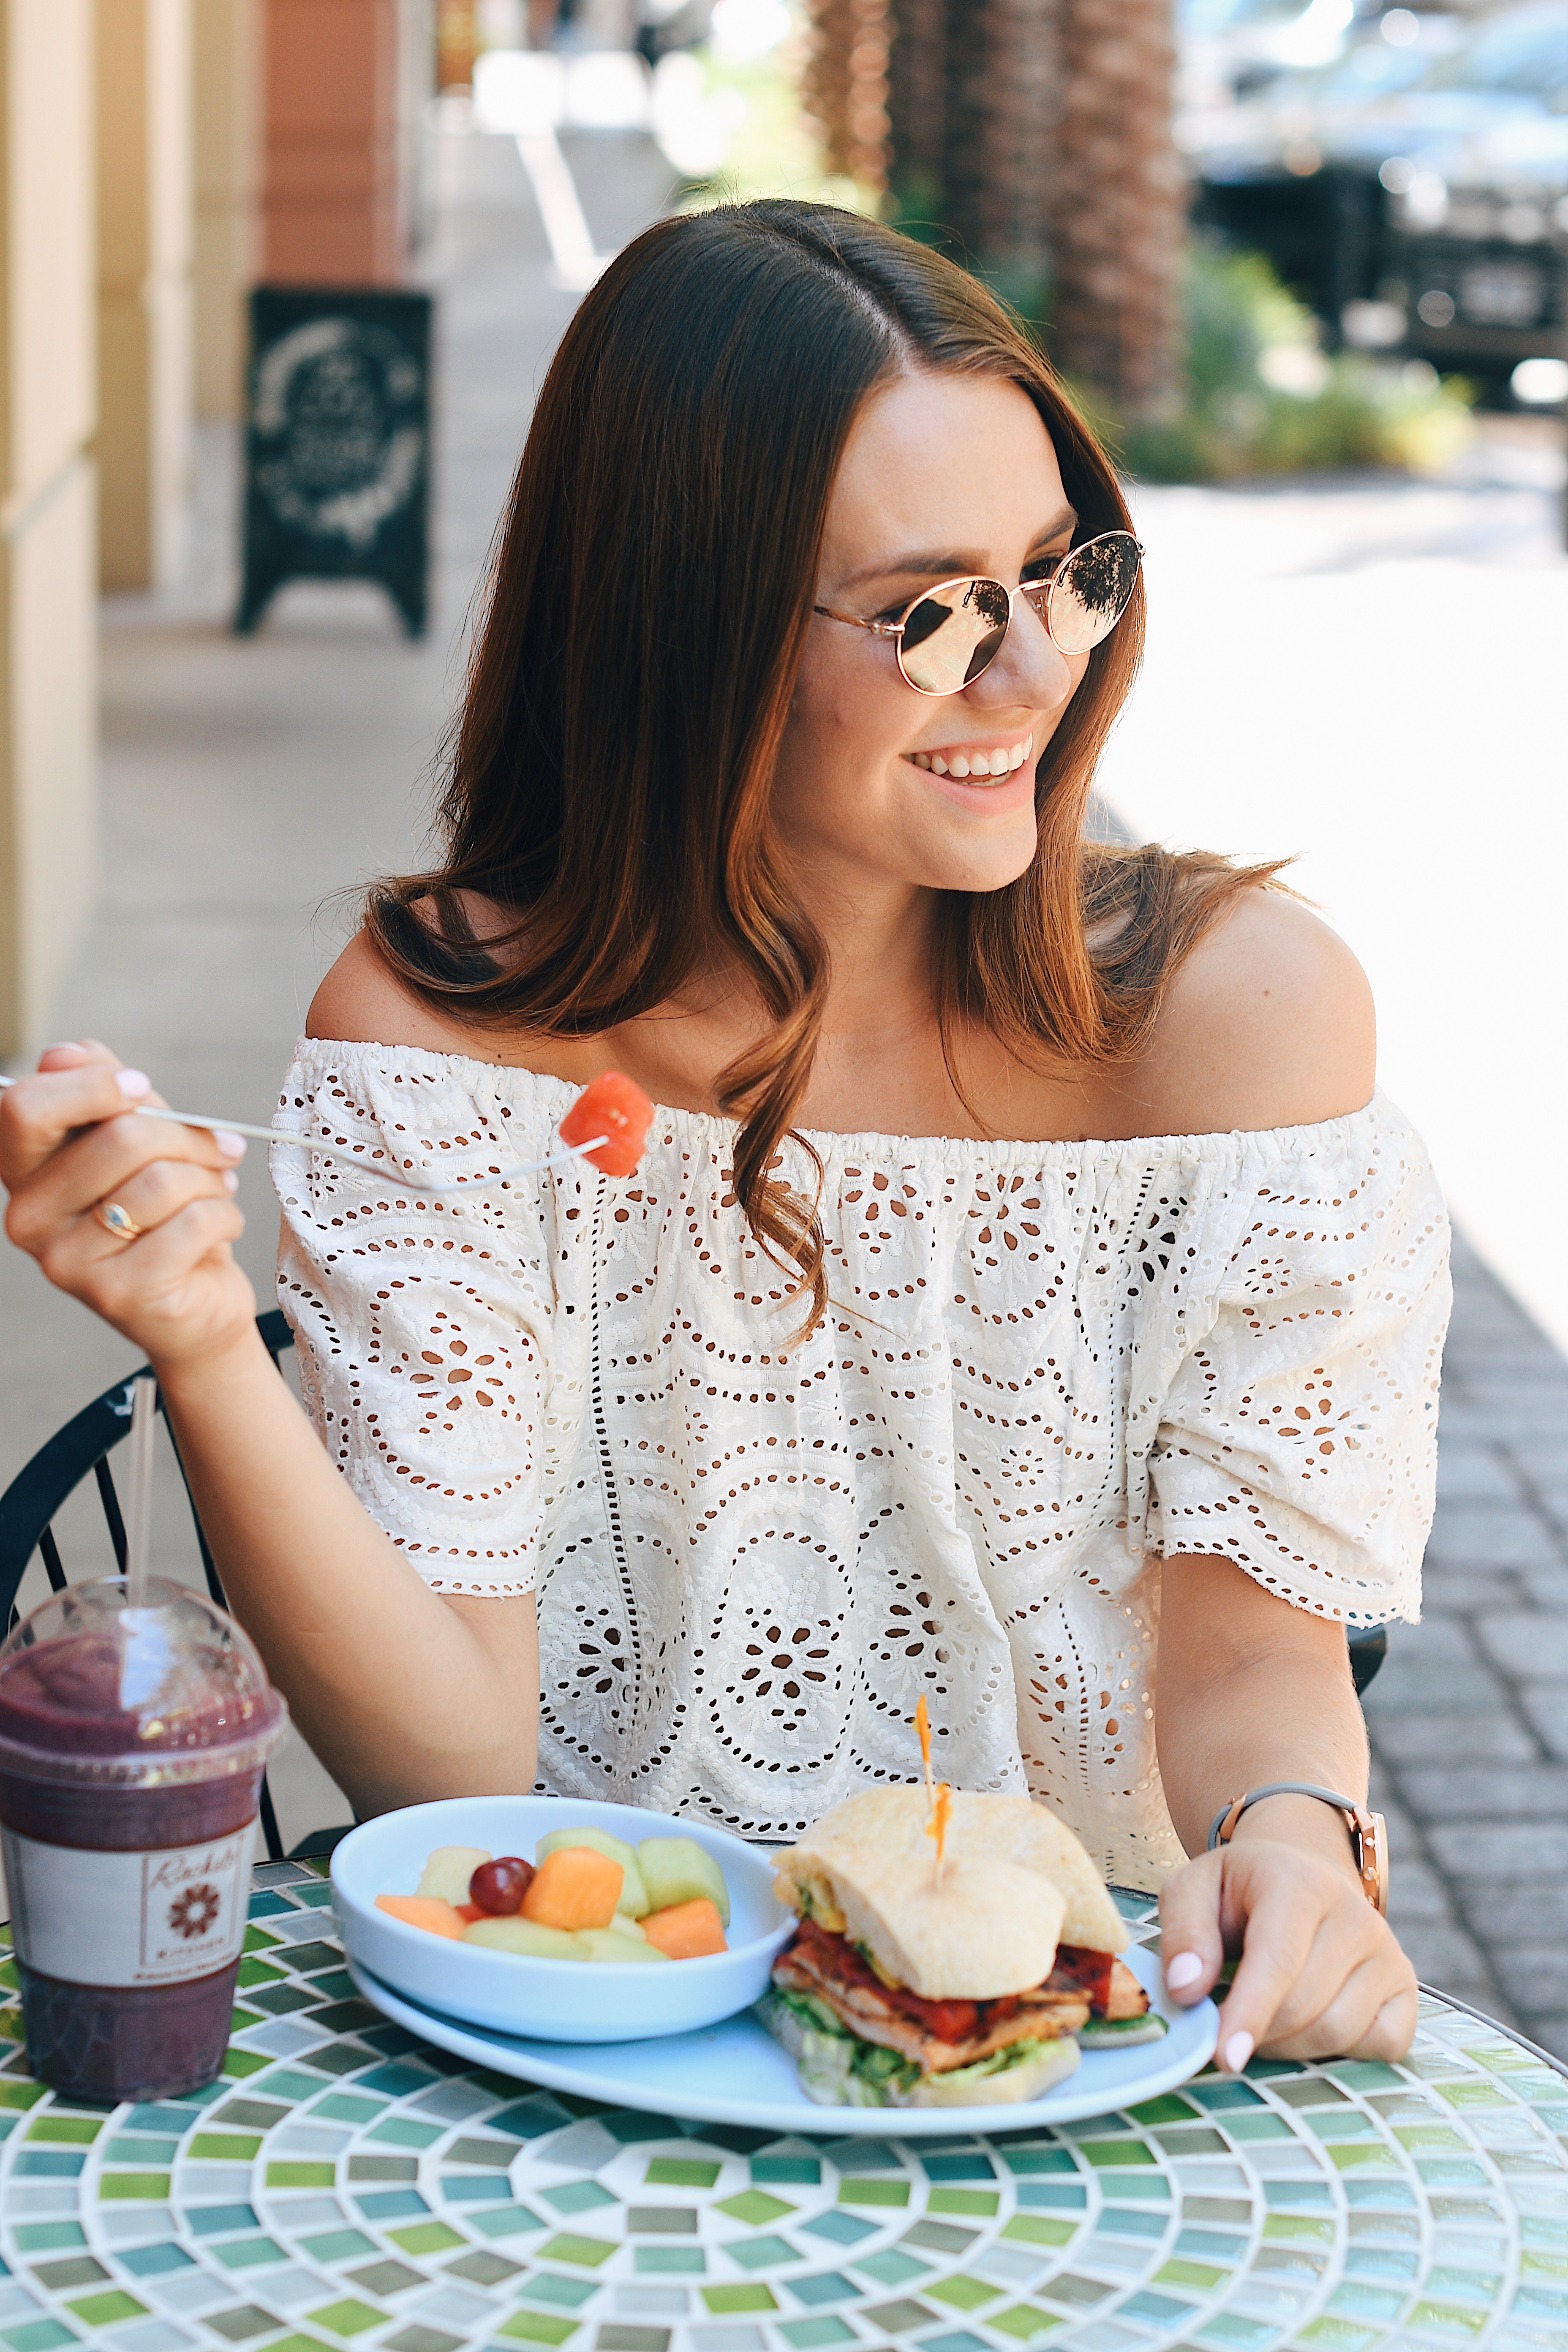 Intuitive eating tips